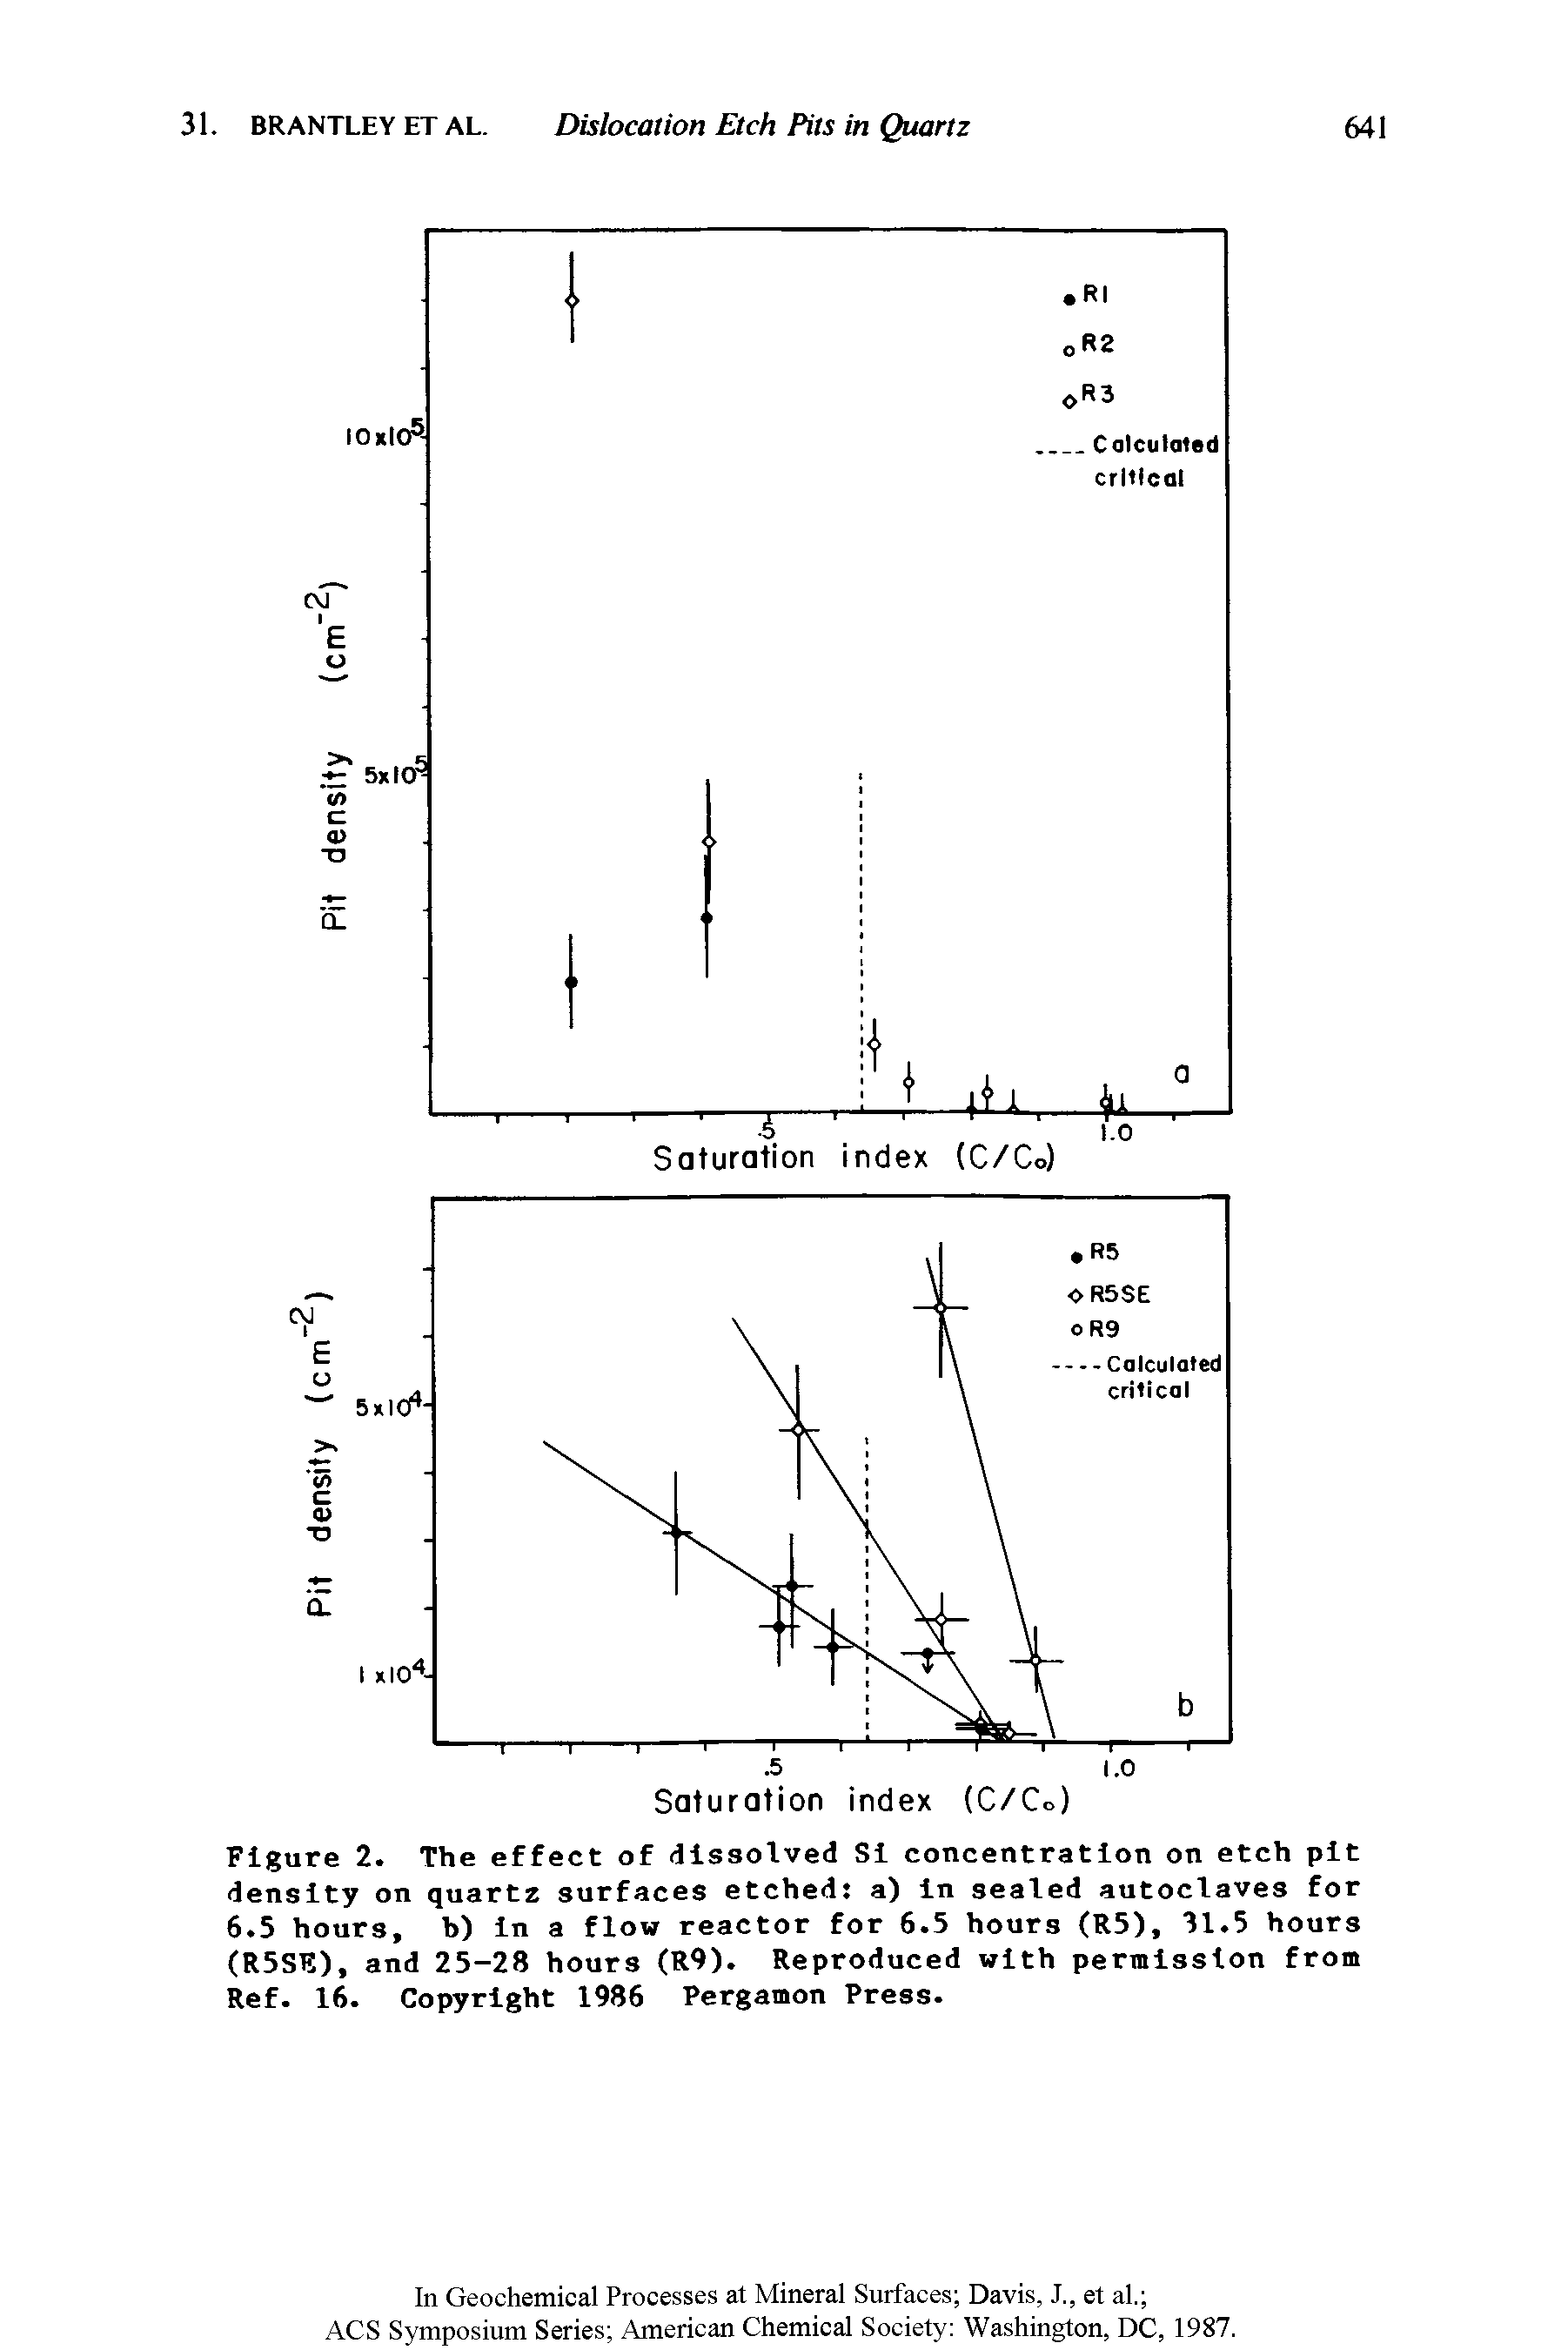 Figure 2. The effect of dissolved Si concentration on etch pit density on quartz surfaces etched a) in sealed autoclaves for 6.5 hours, b) in a flow reactor for 6.5 hours (R5), 31.5 hours (R5SK), and 25-28 hours (R9). Reproduced with permission from Ref. 16. Copyright 1986 Pergamon Press.